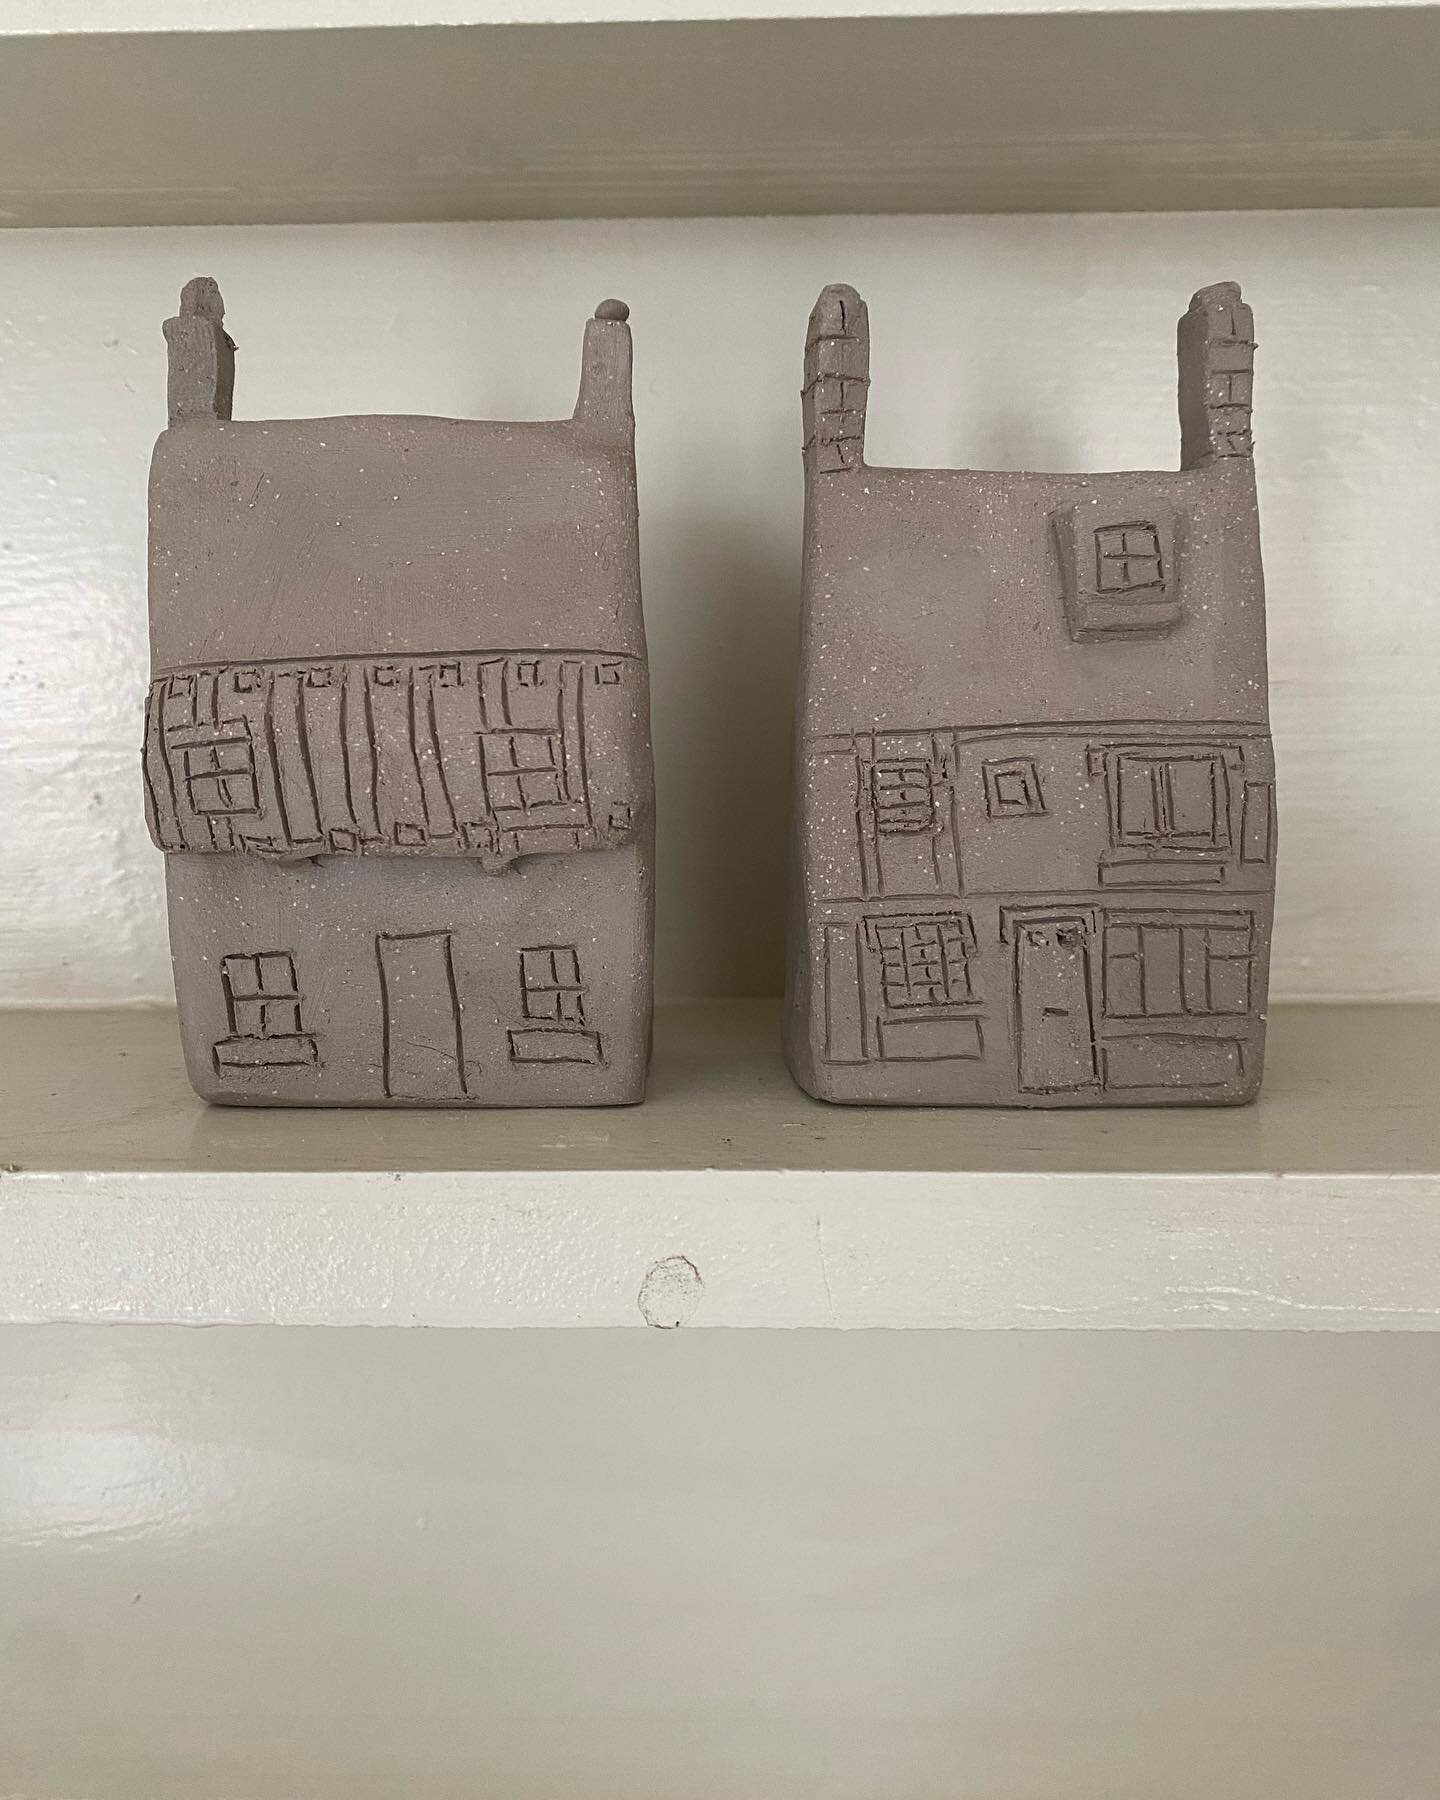 Taking inspiration locally for some of the houses in my next collection.

I live in a beautiful market town in North West Essex called Saffron Walden which has many beamed and pargetted houses which are often wonky too. 

I am taking a few days to de